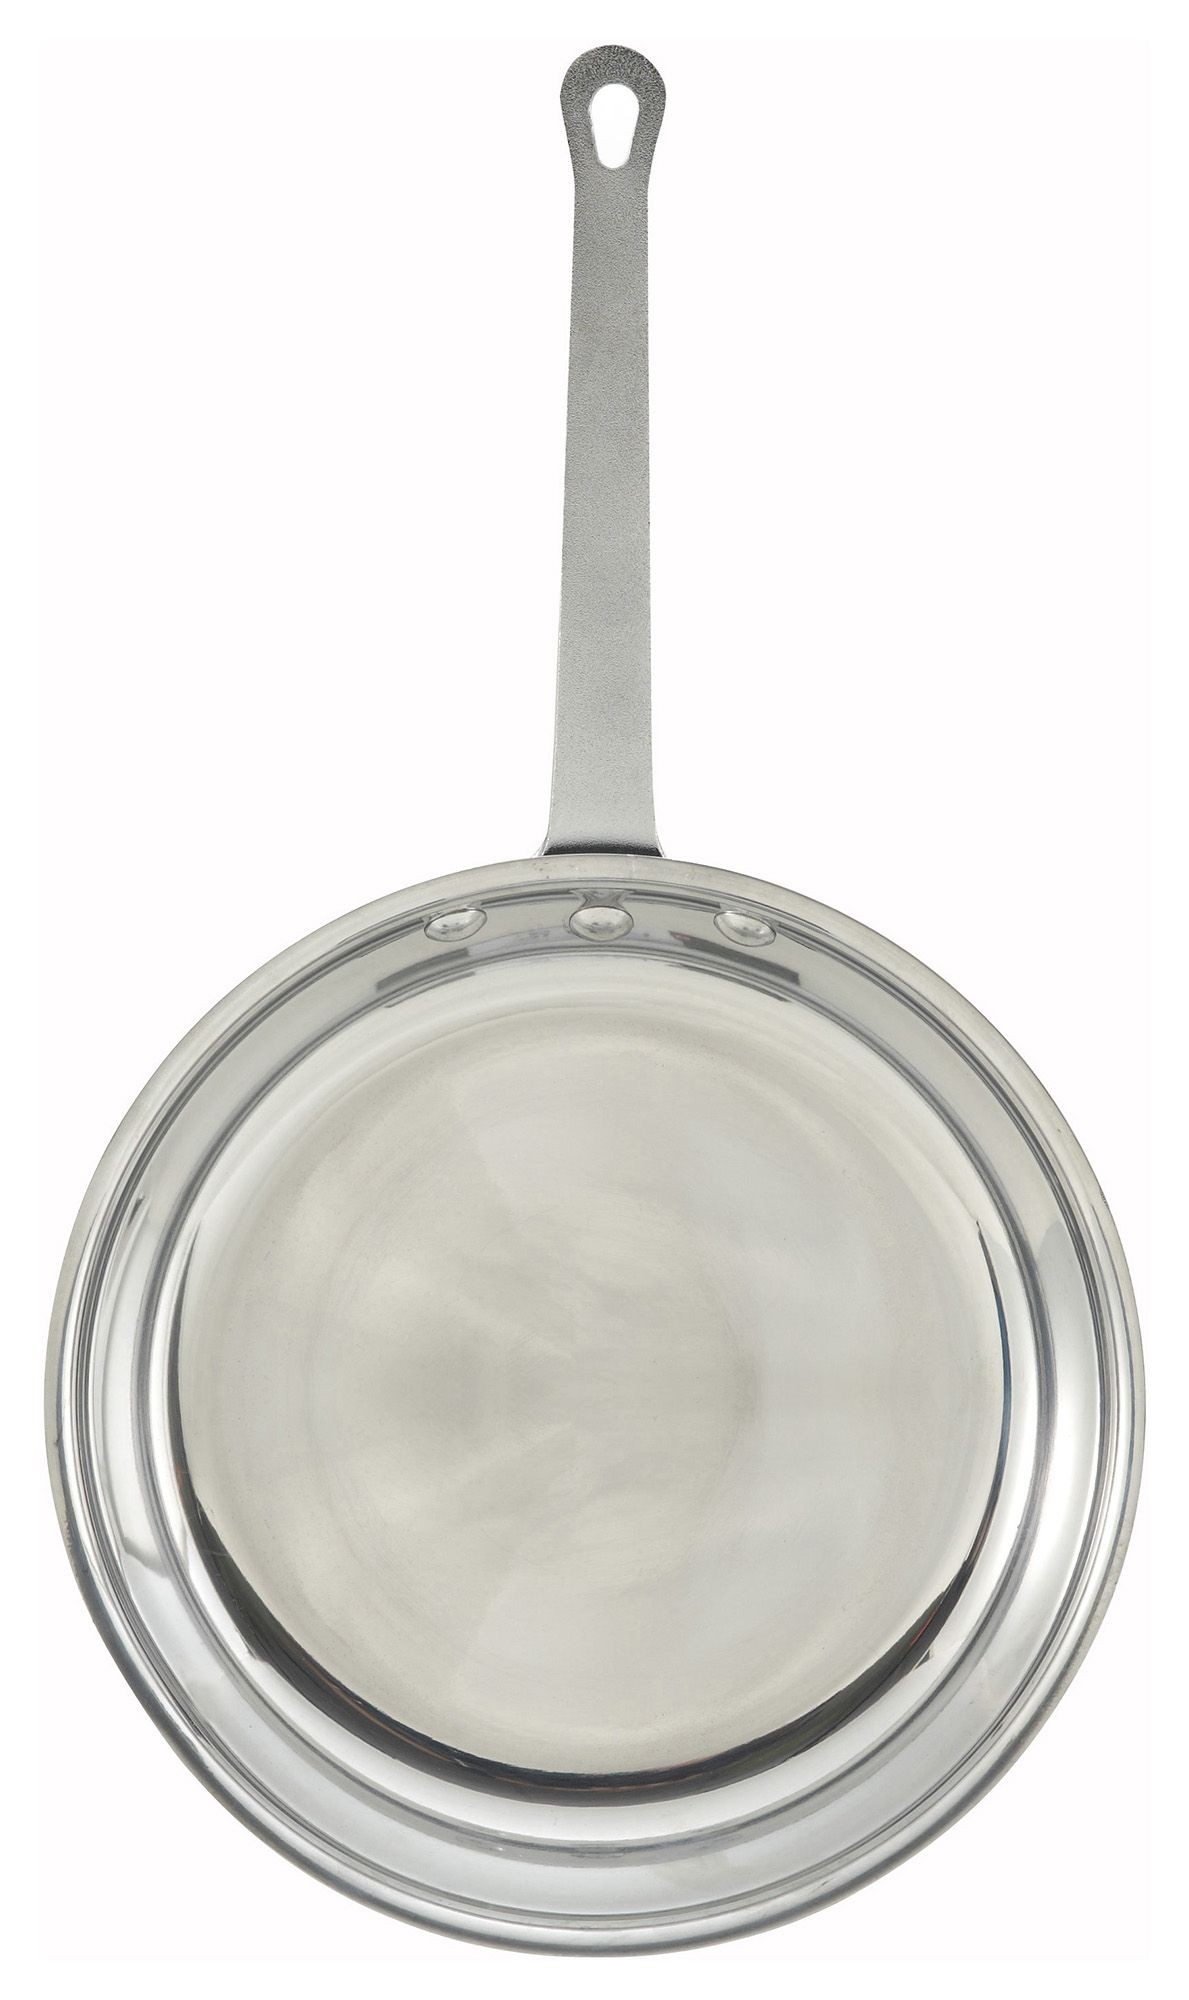 Winco AFP-14 14" Majestic Aluminum Fry Pan with Mirror Finish